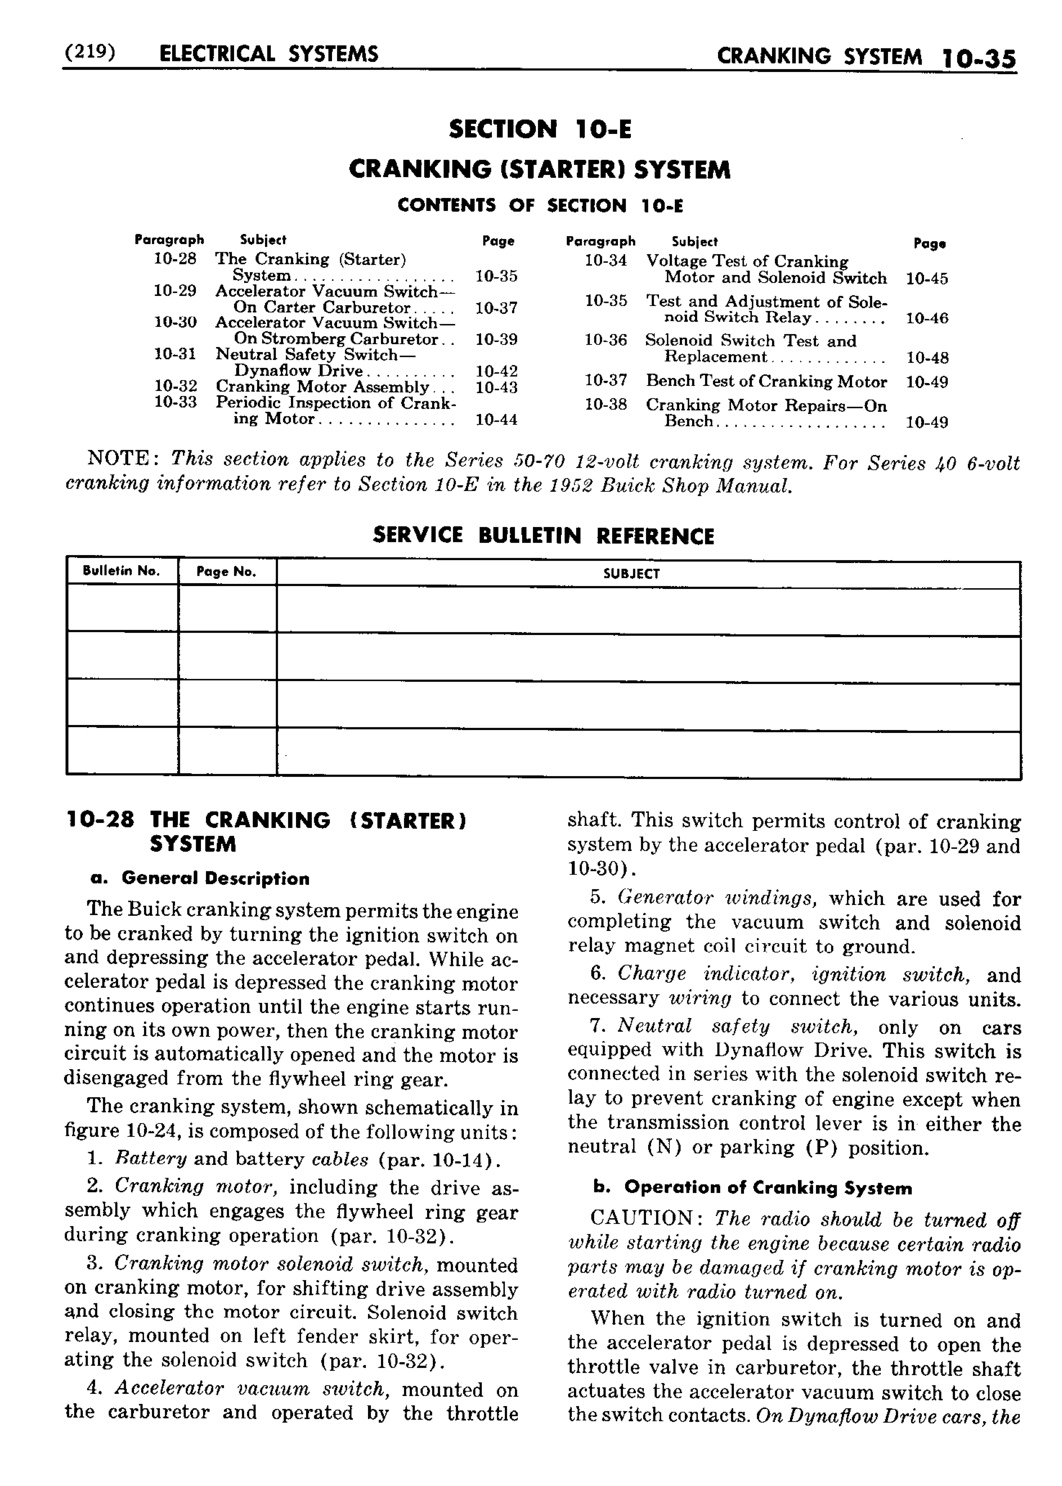 n_11 1953 Buick Shop Manual - Electrical Systems-035-035.jpg